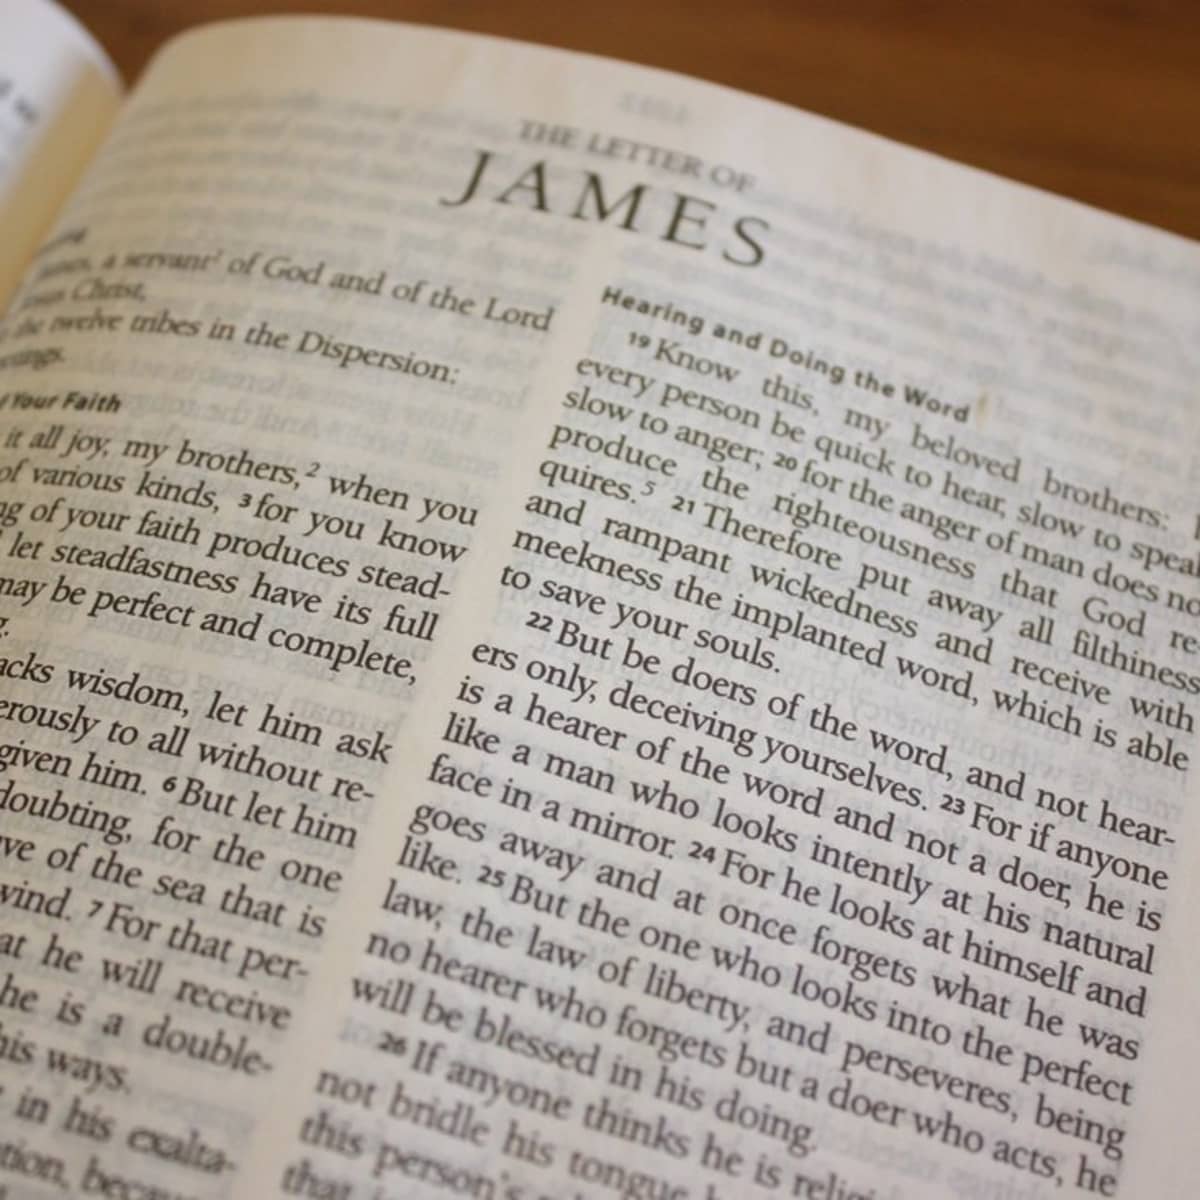 why was the book of james written